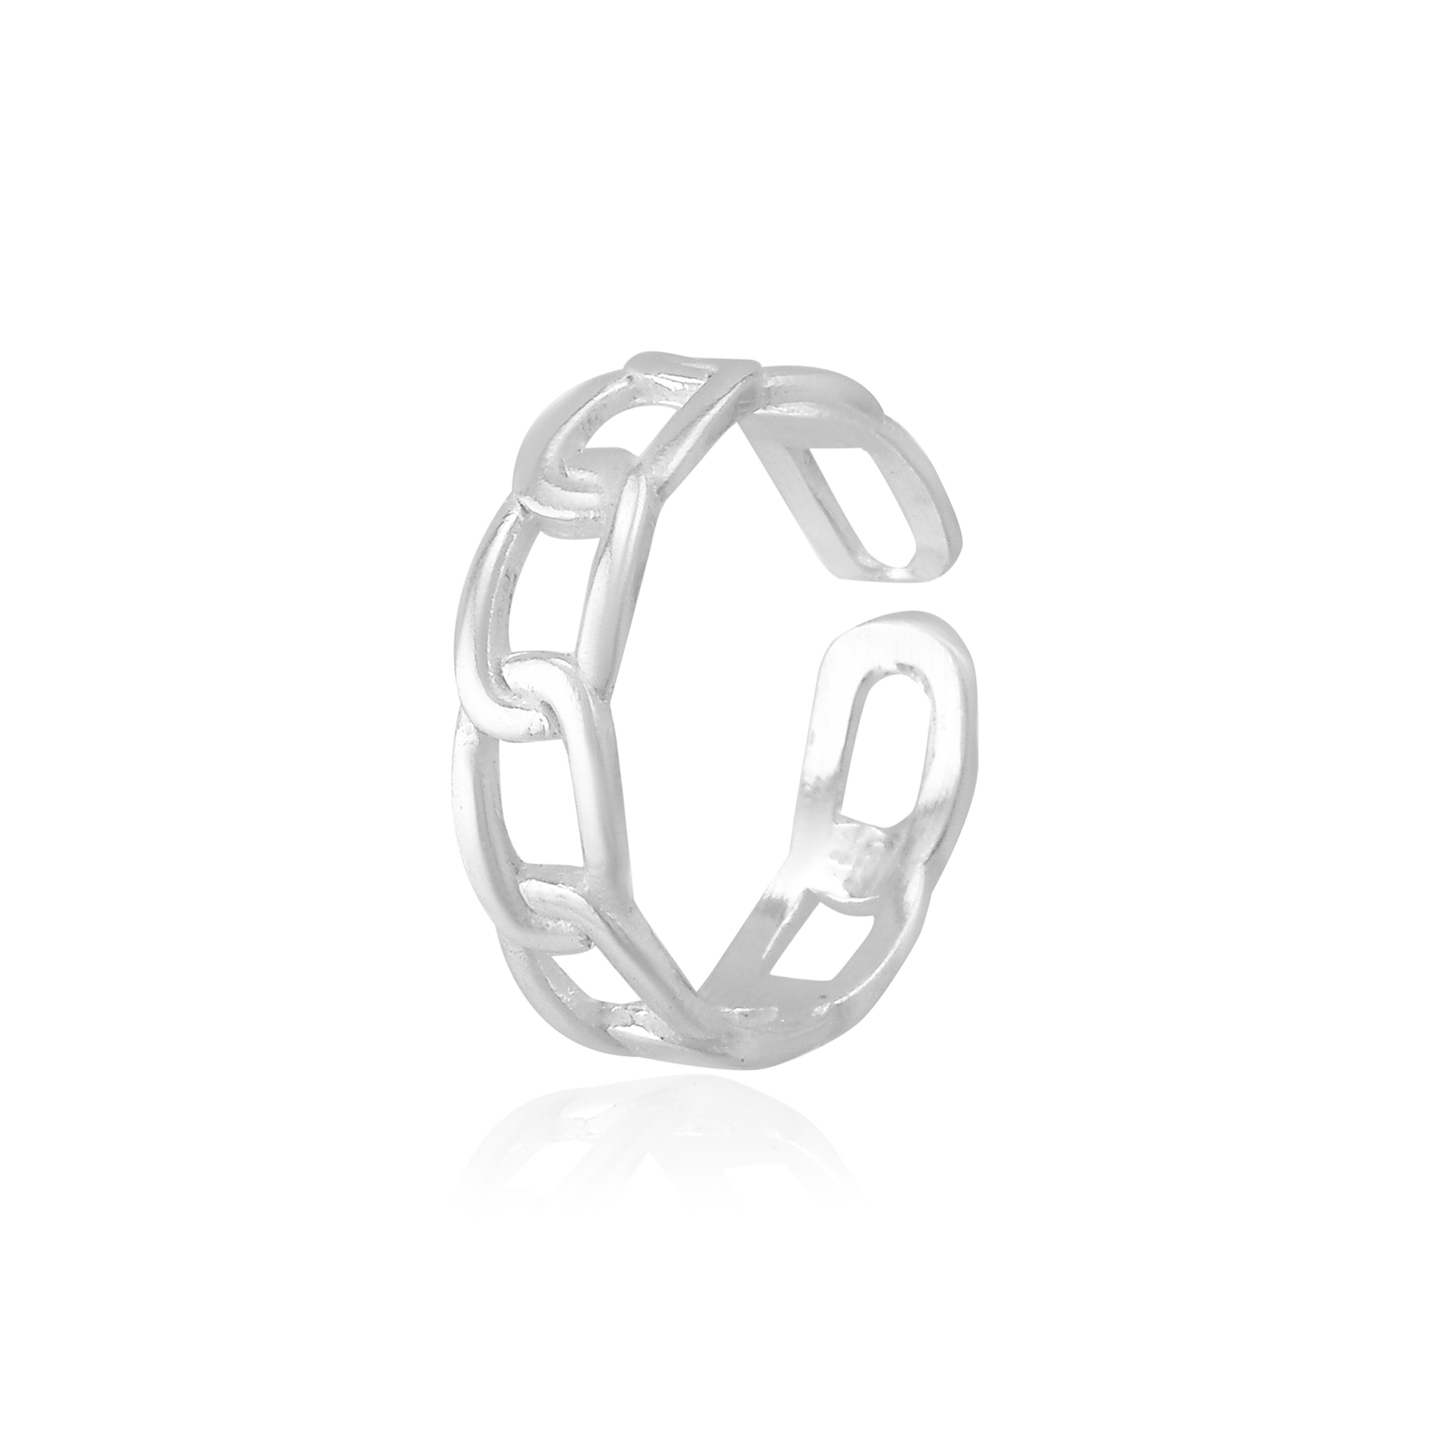 Adjustable Light Weight Sterling Silver 925 Ring For Women